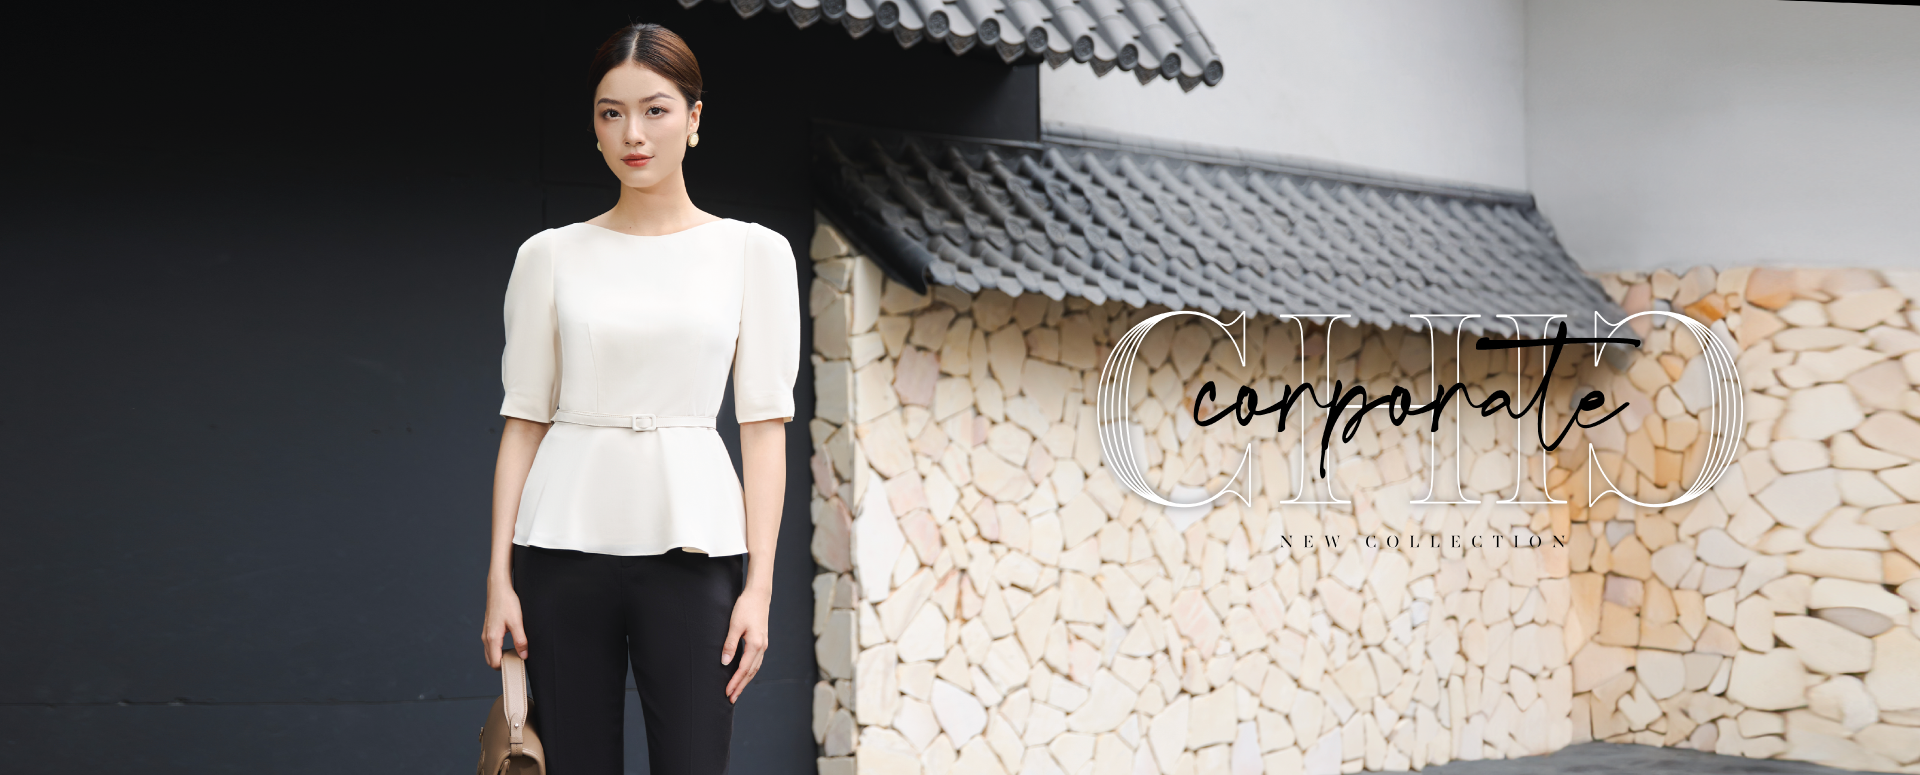 Corporate Chic Collection